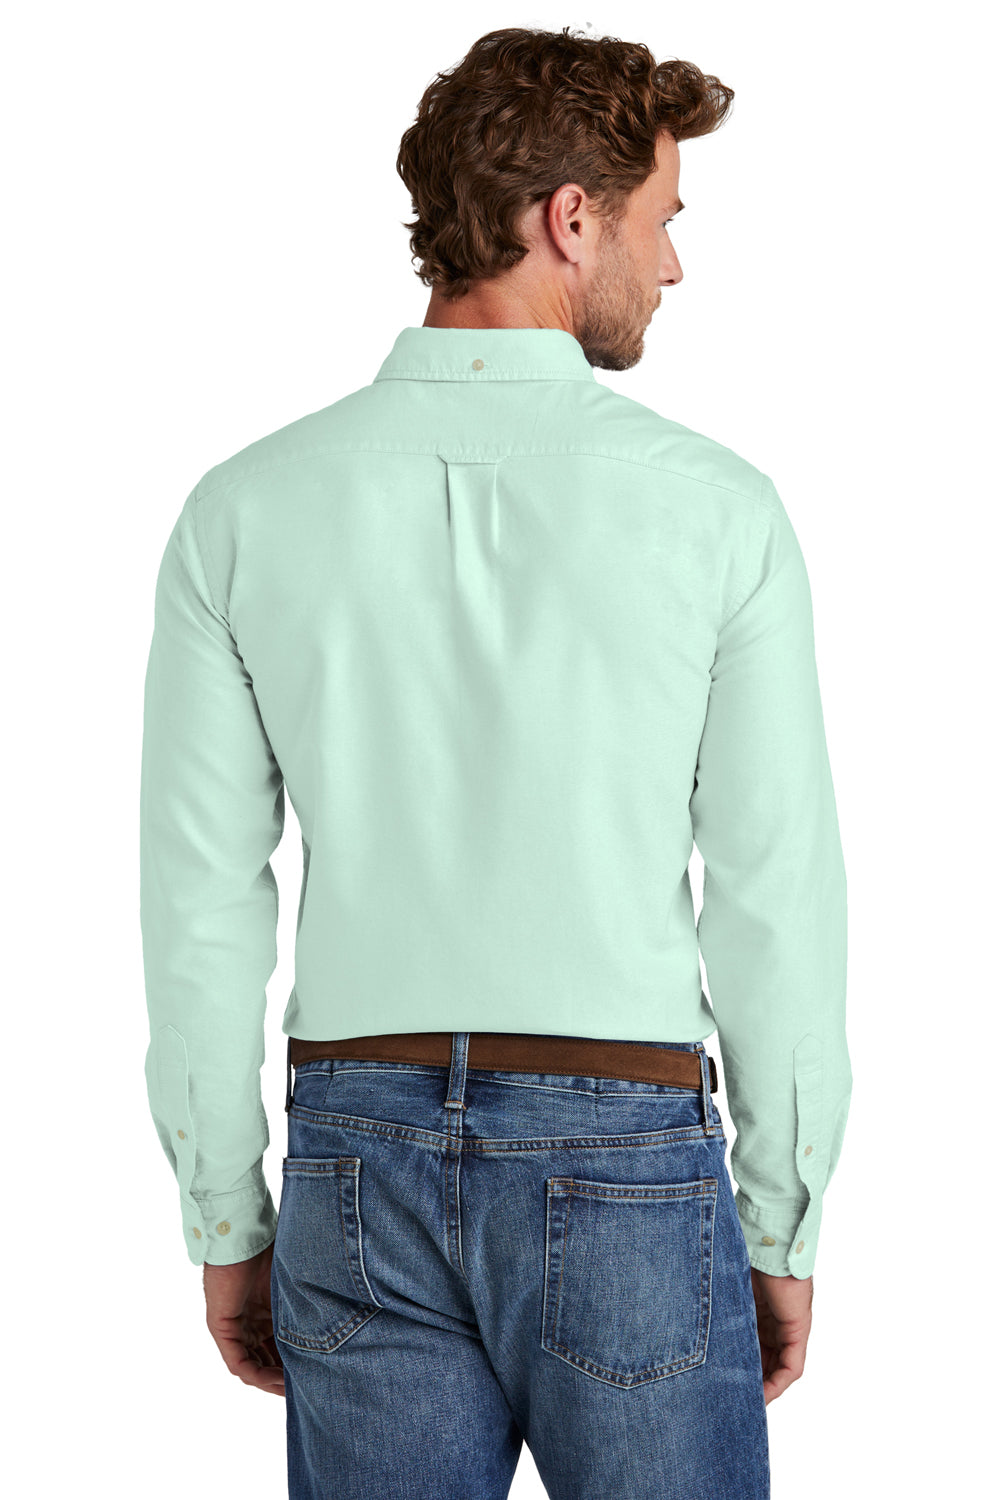 Brooks Brothers Mens Casual Oxford Long Sleeve Button Down Shirt w/ Pocket Soft Mint Green Model Back